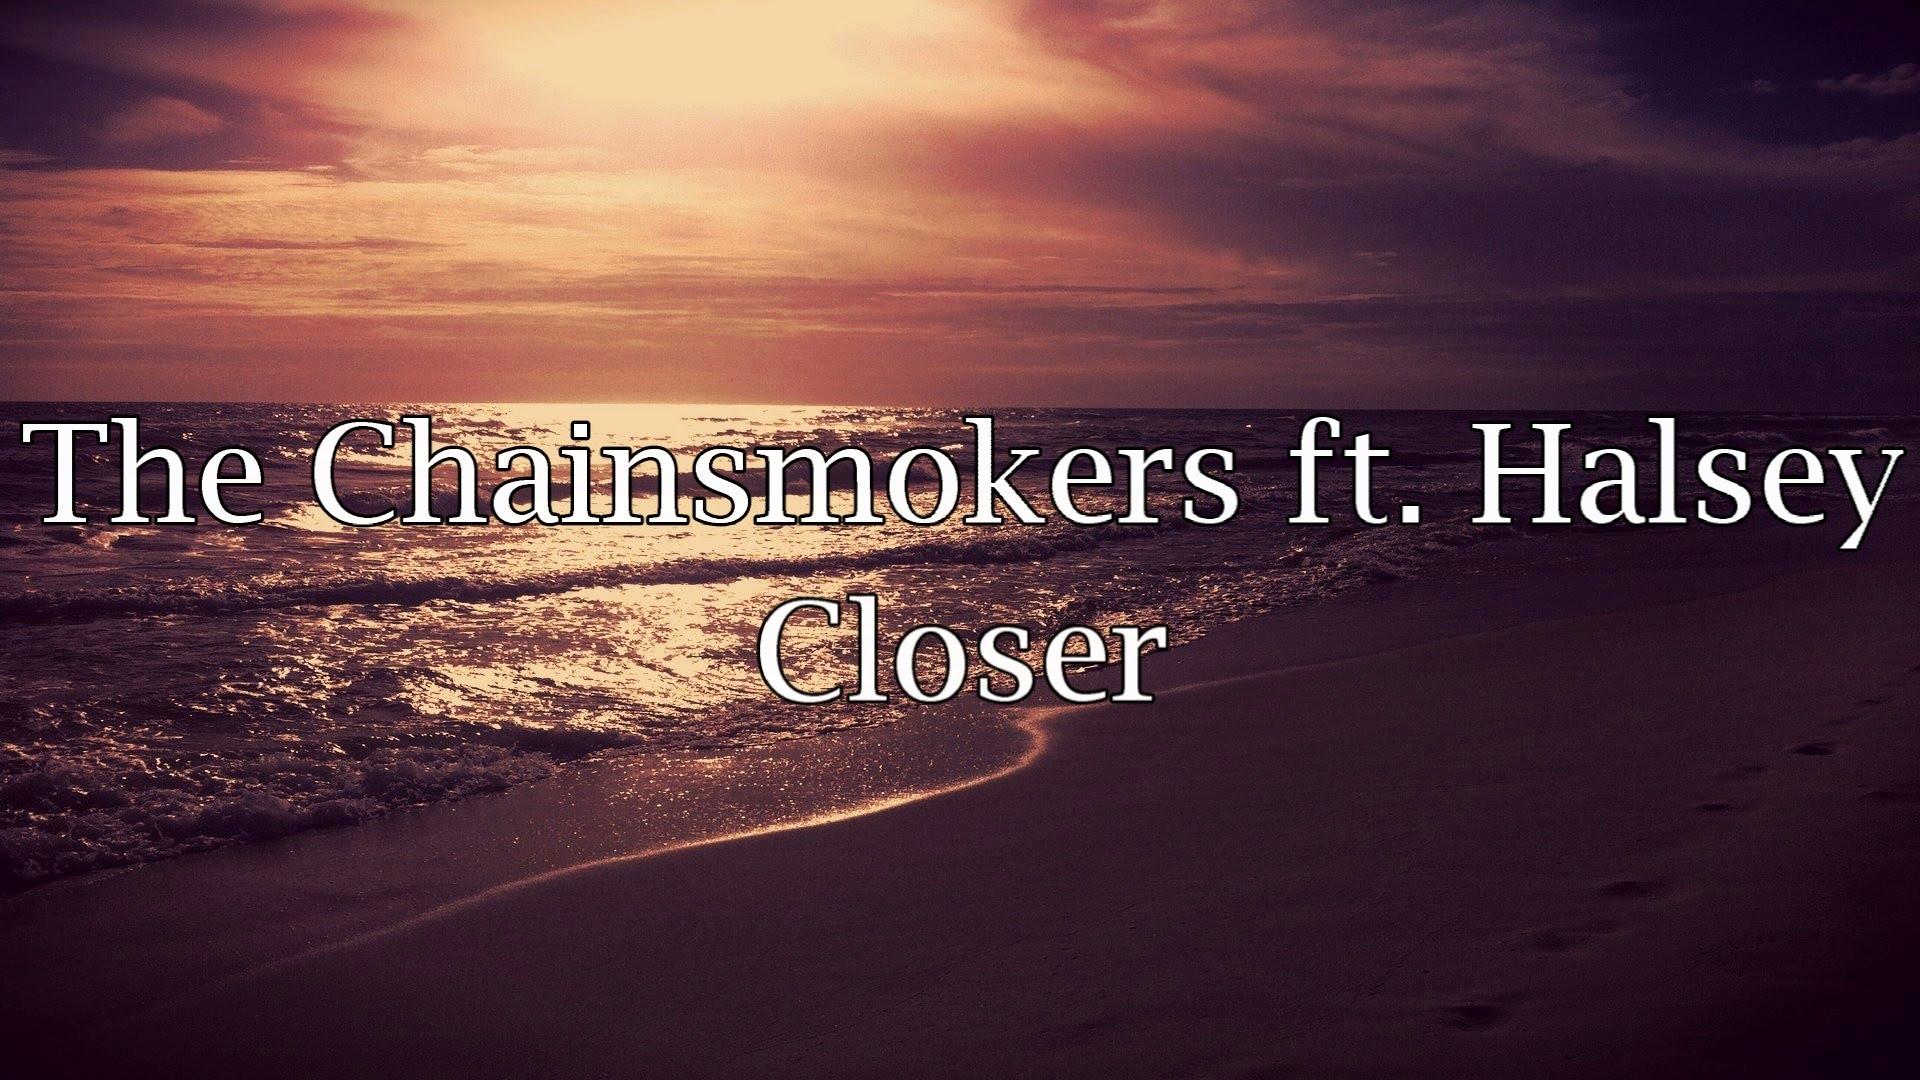 Closer by Ginny Weasley for Harry Potter